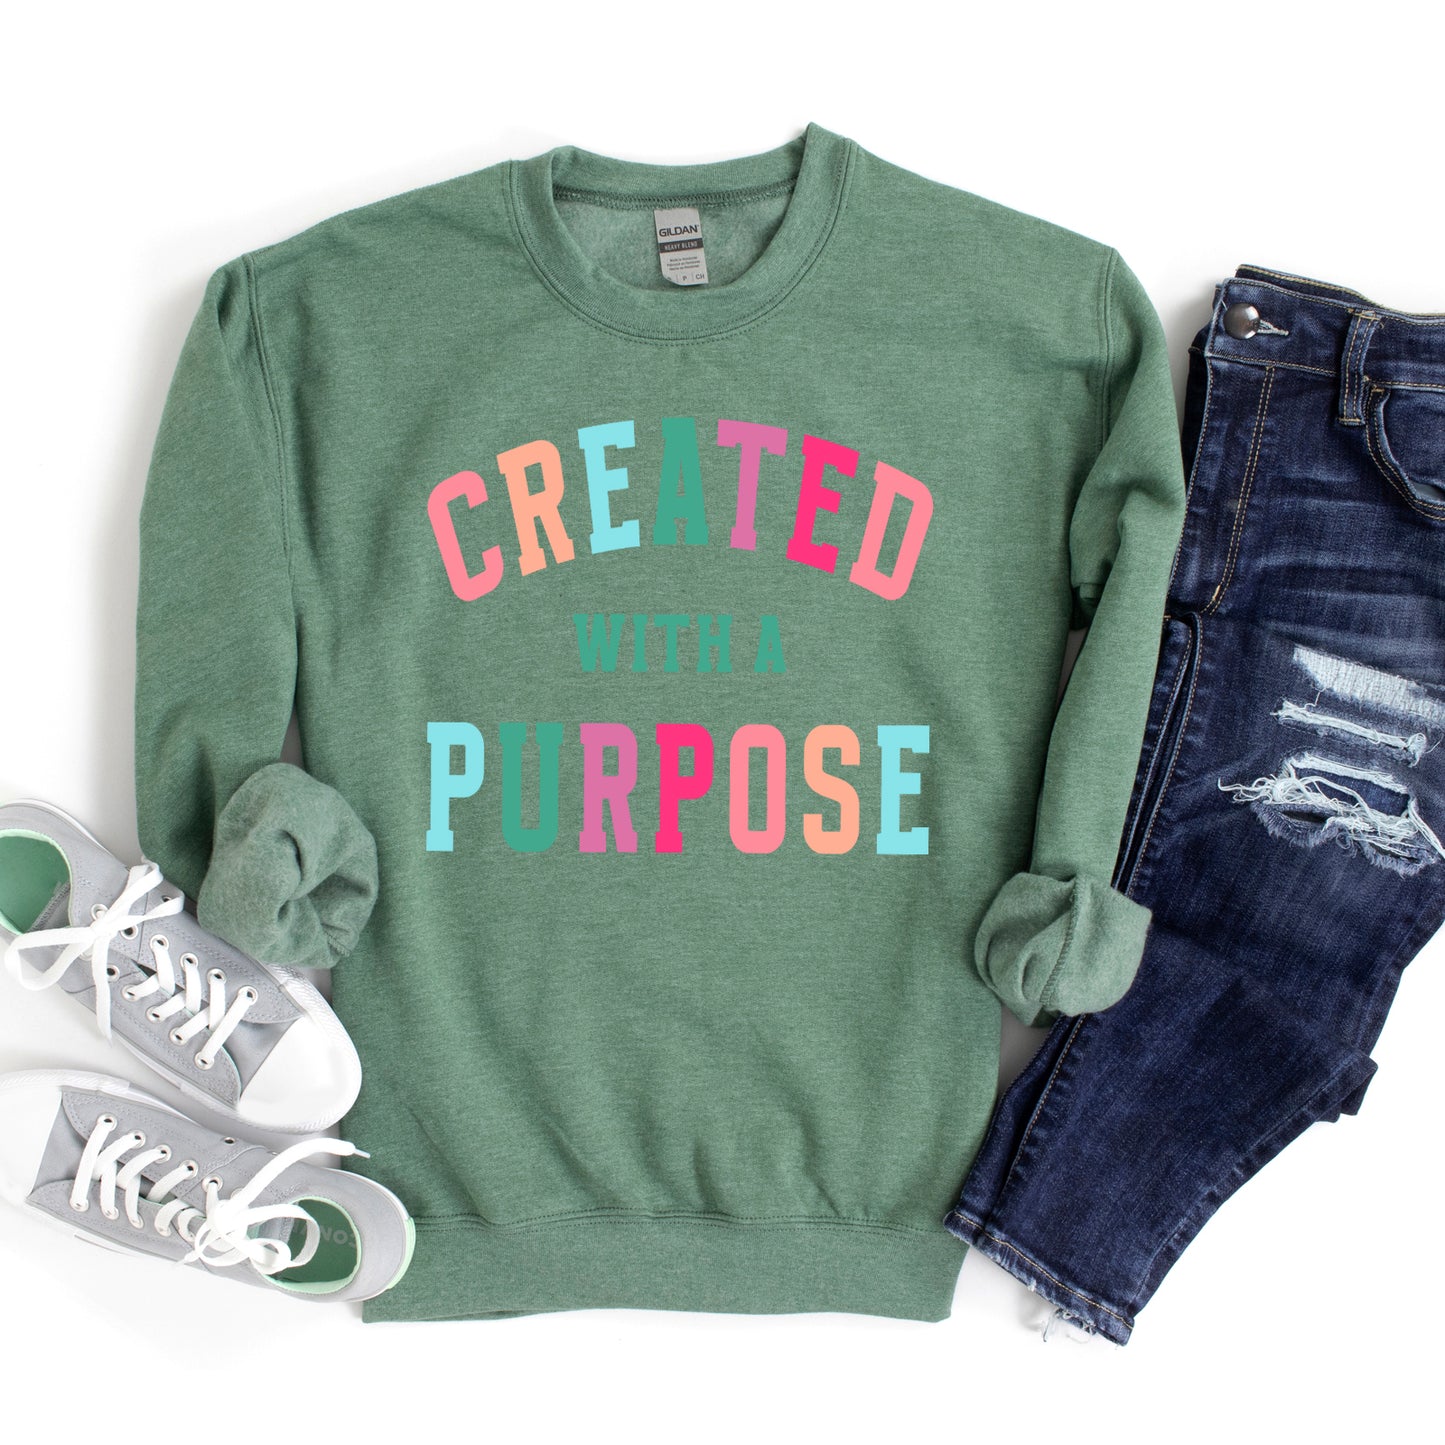 Created With A Purpose Colorful | Graphic Sweatshirt